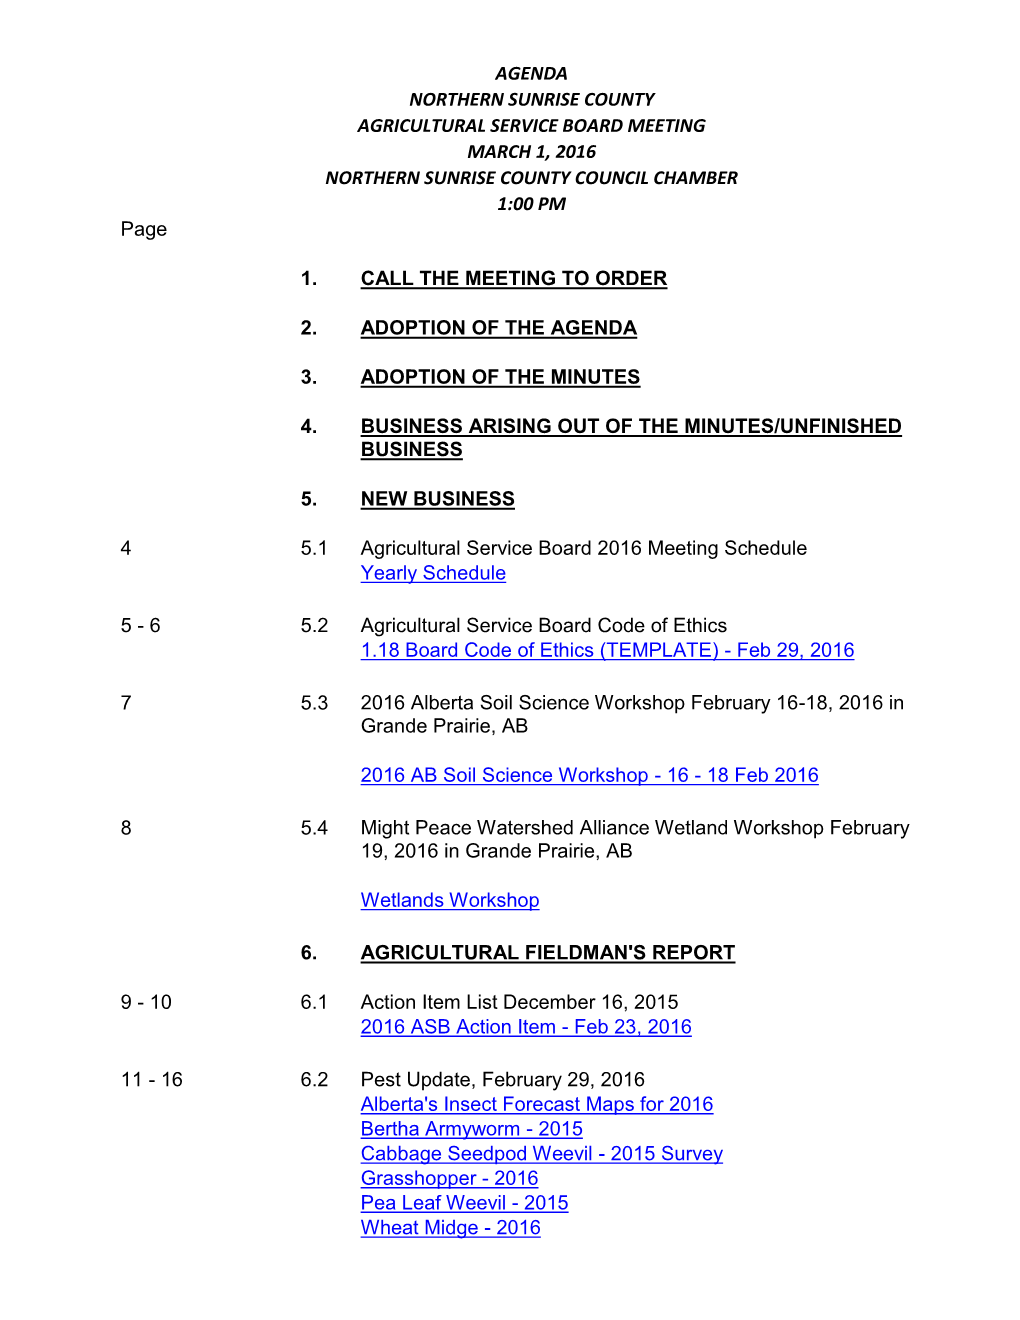 AGRICULTURAL SERVICE BOARD MEETING MARCH 1, 2016 NORTHERN SUNRISE COUNTY COUNCIL CHAMBER 1:00 PM Page